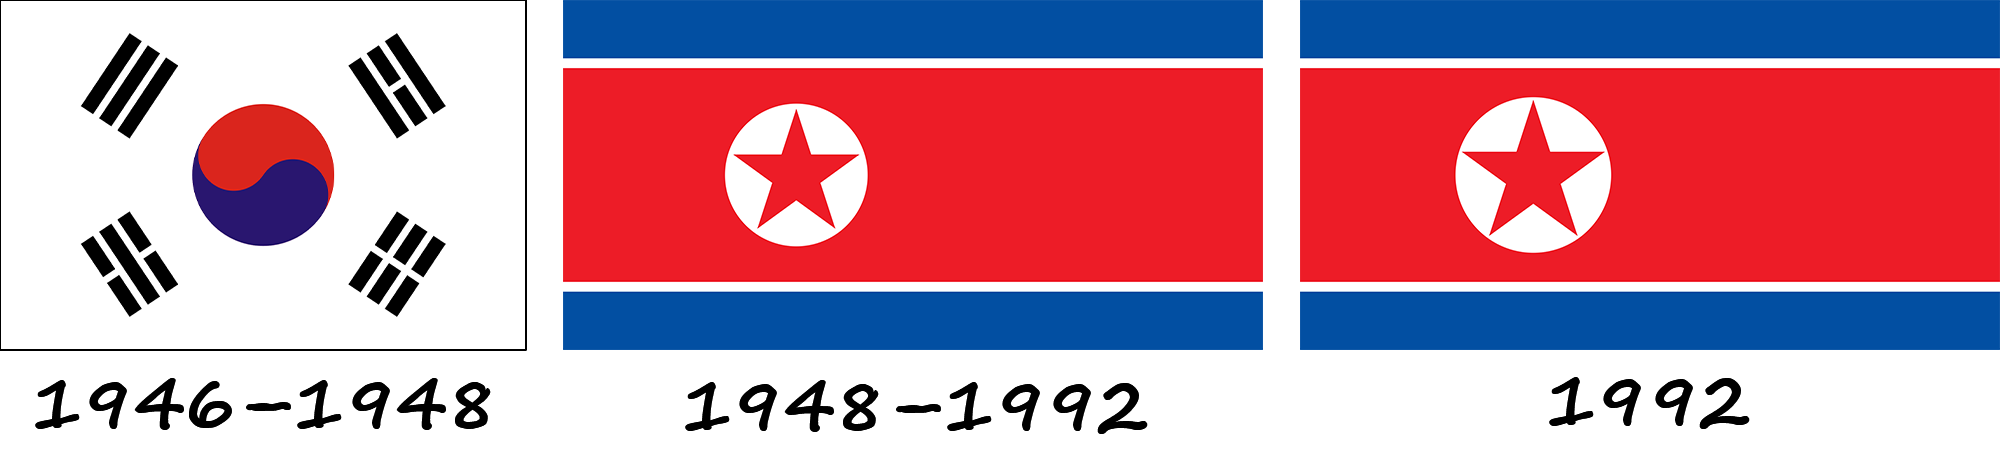 History of the North Korean flag